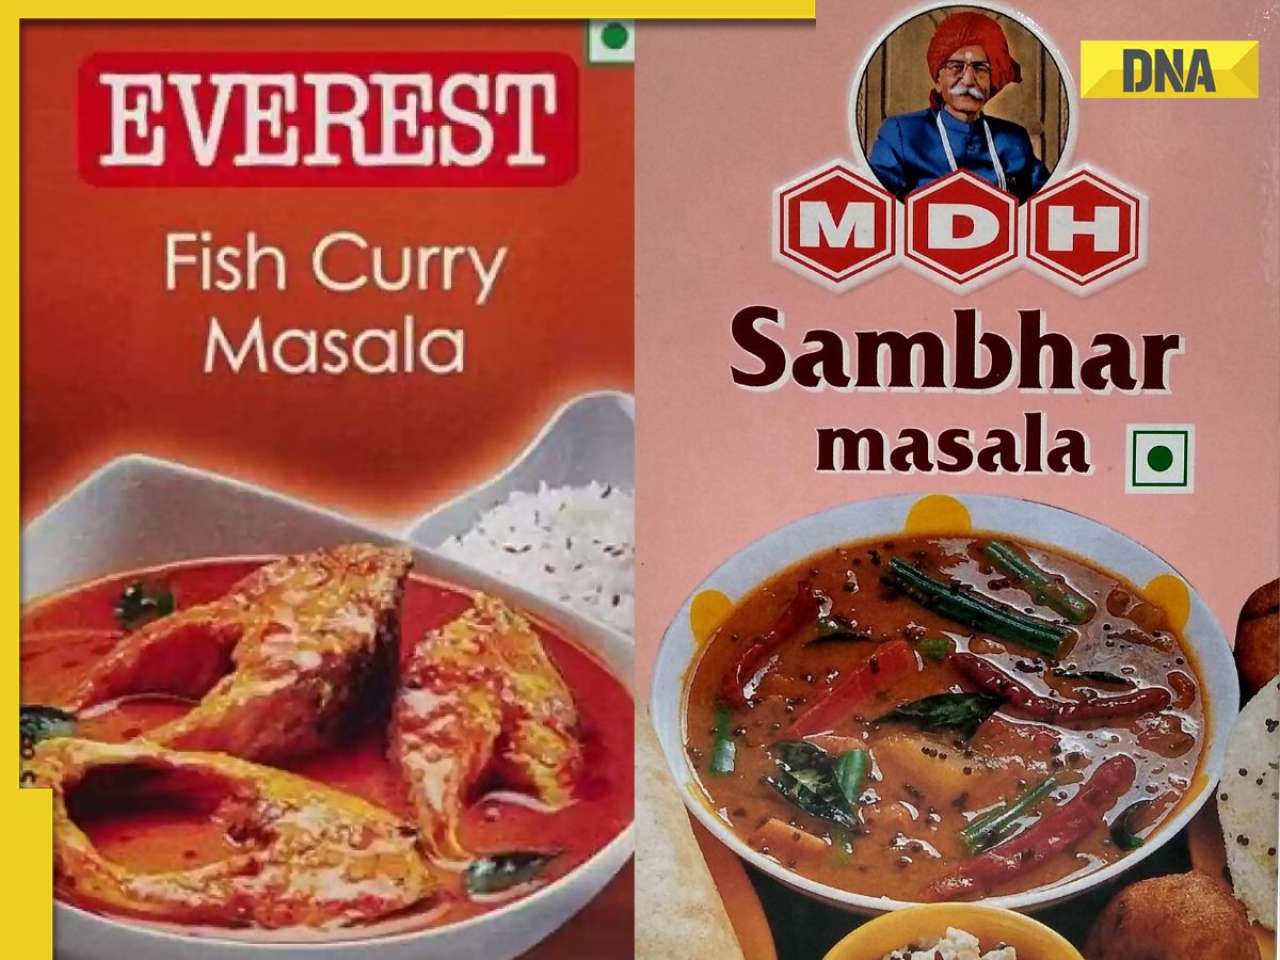 Hong Kong, Singapore ban sale of MDH, Everest spices, here’s why